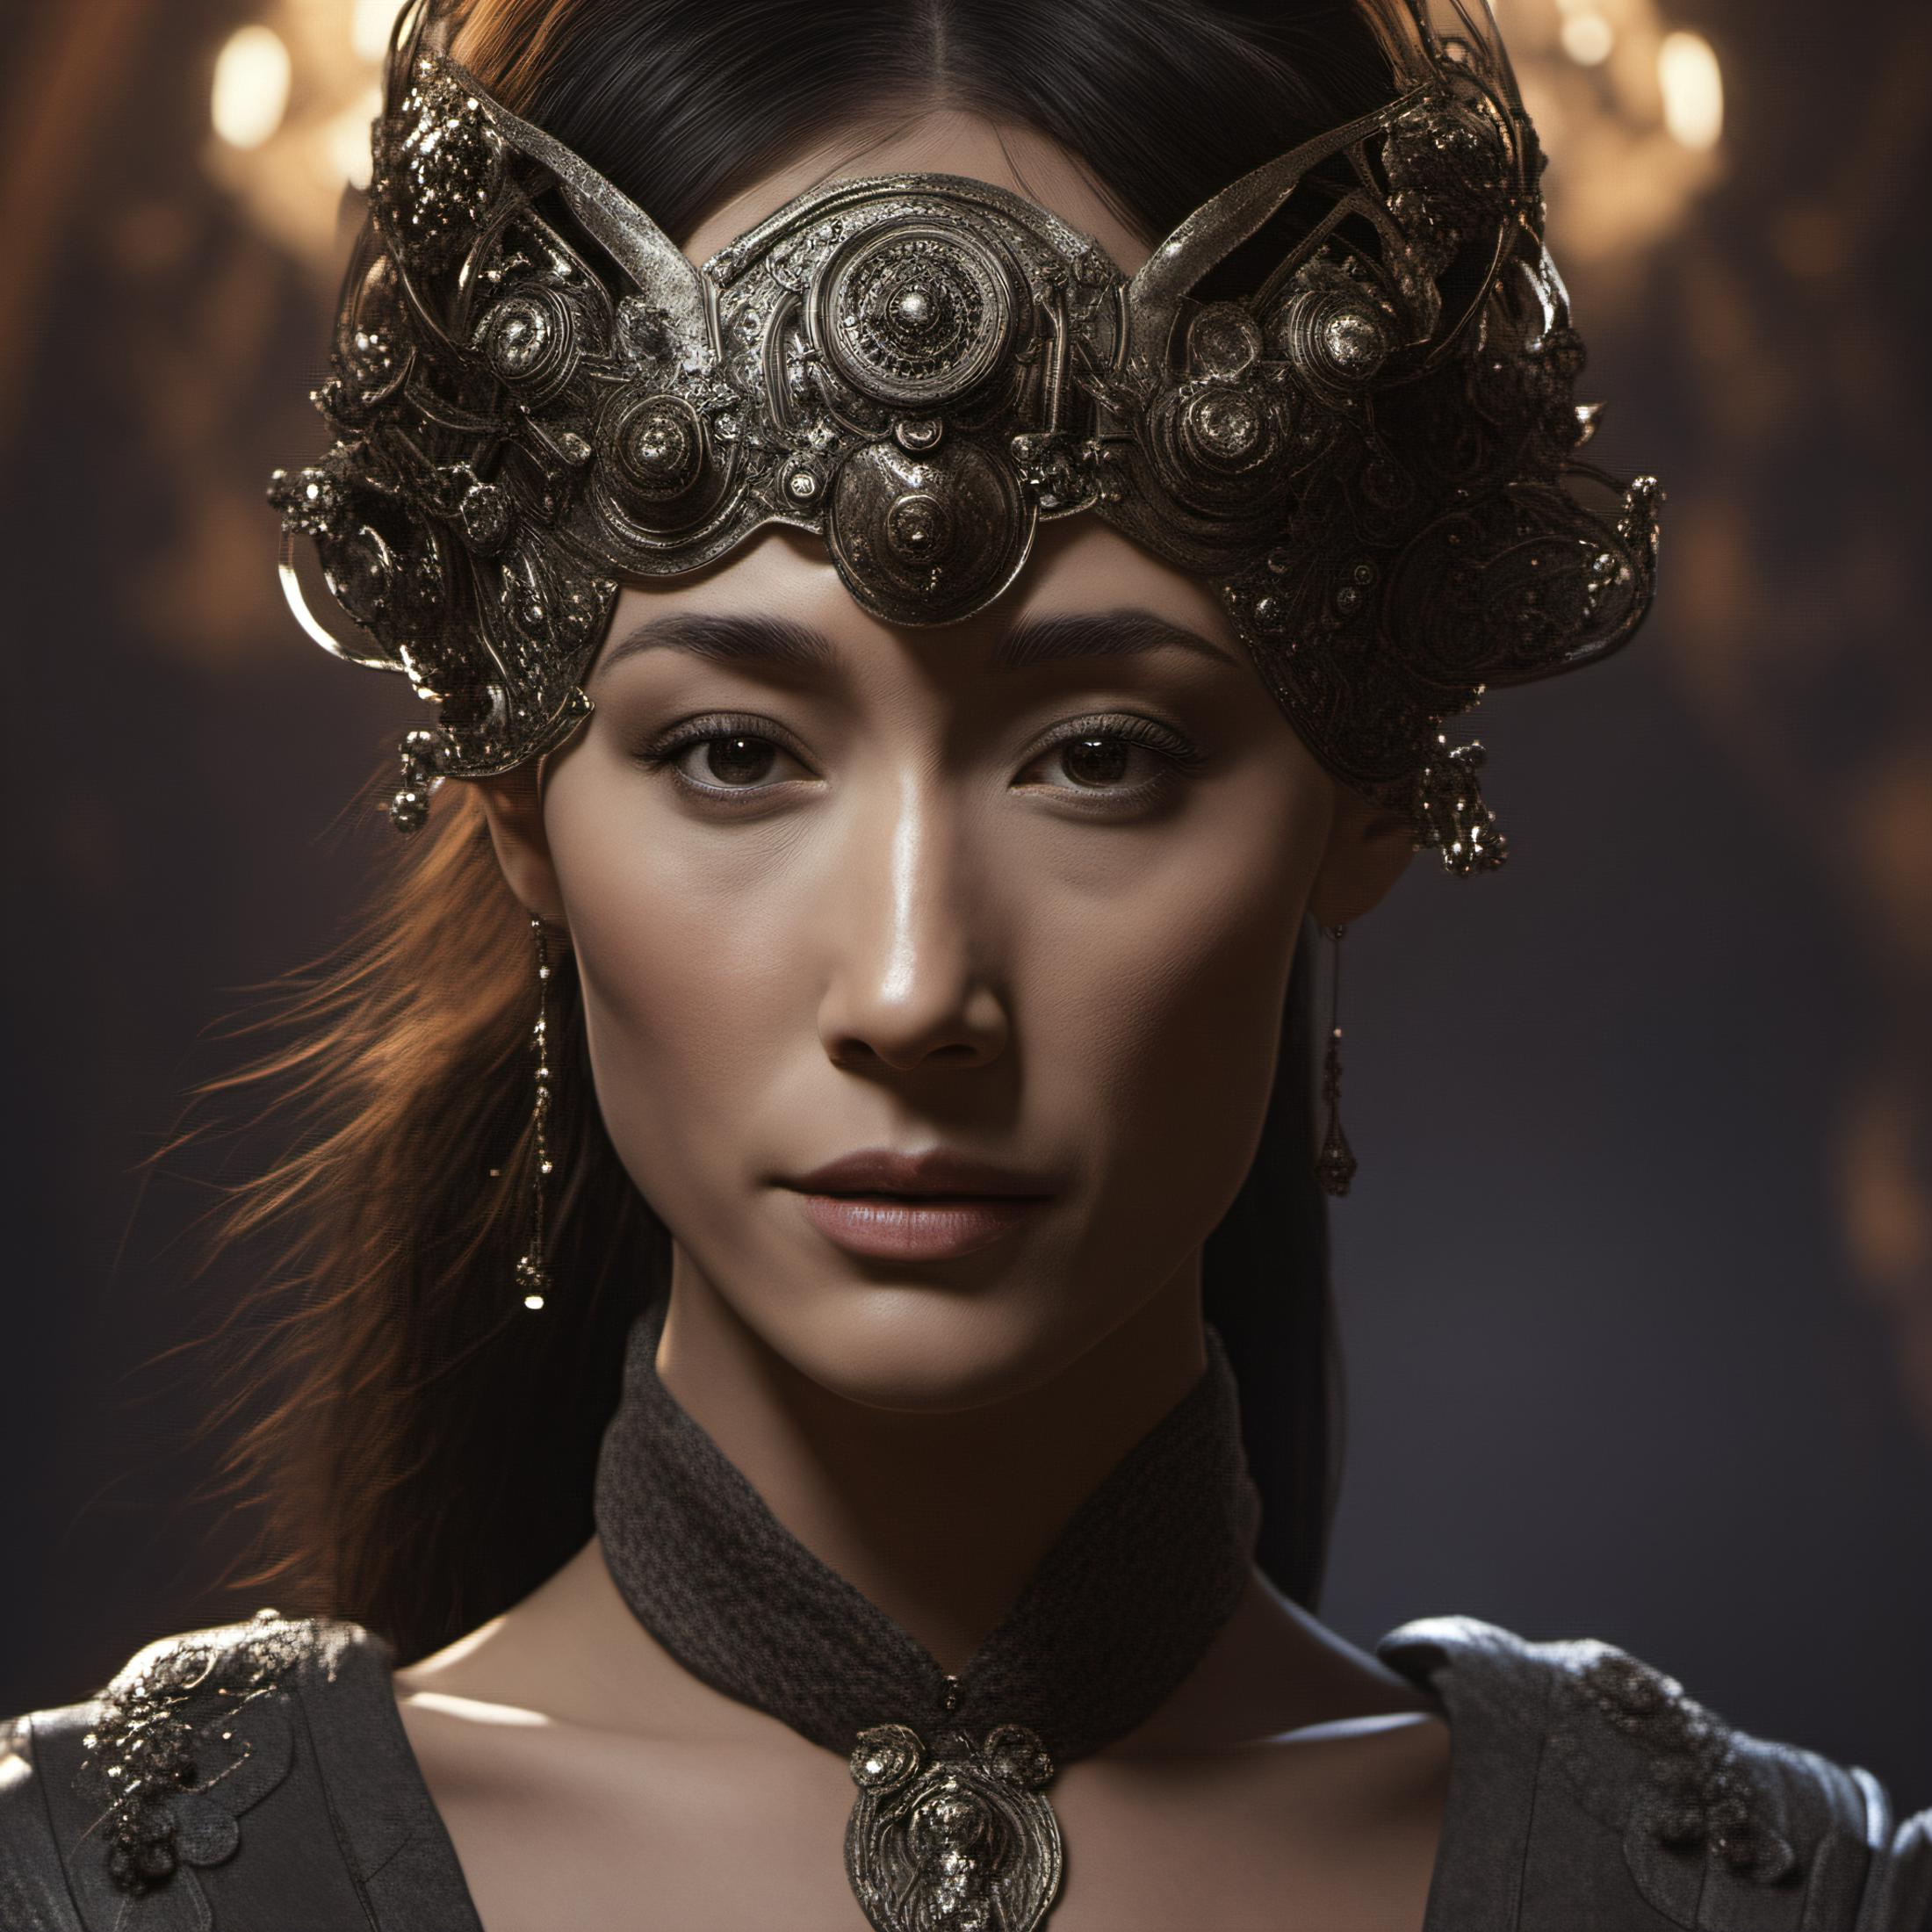 maggie Q realistic sdxl1.0 base model trained lora image by frankchieng